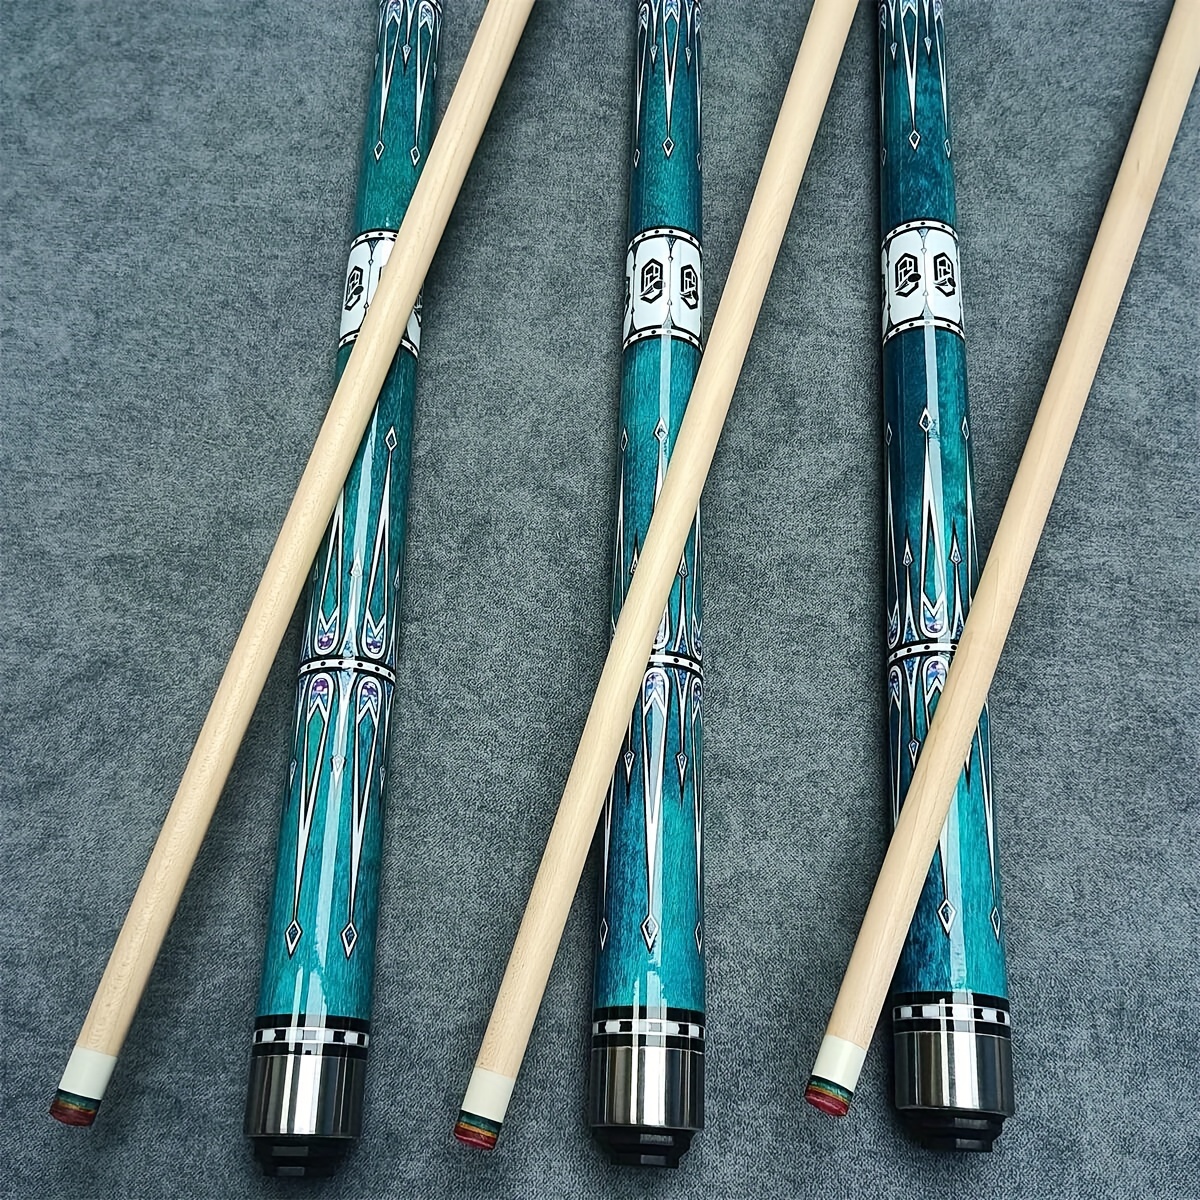 3/4 Carbon Cues from woods cues. Does anyone have any knowledge on